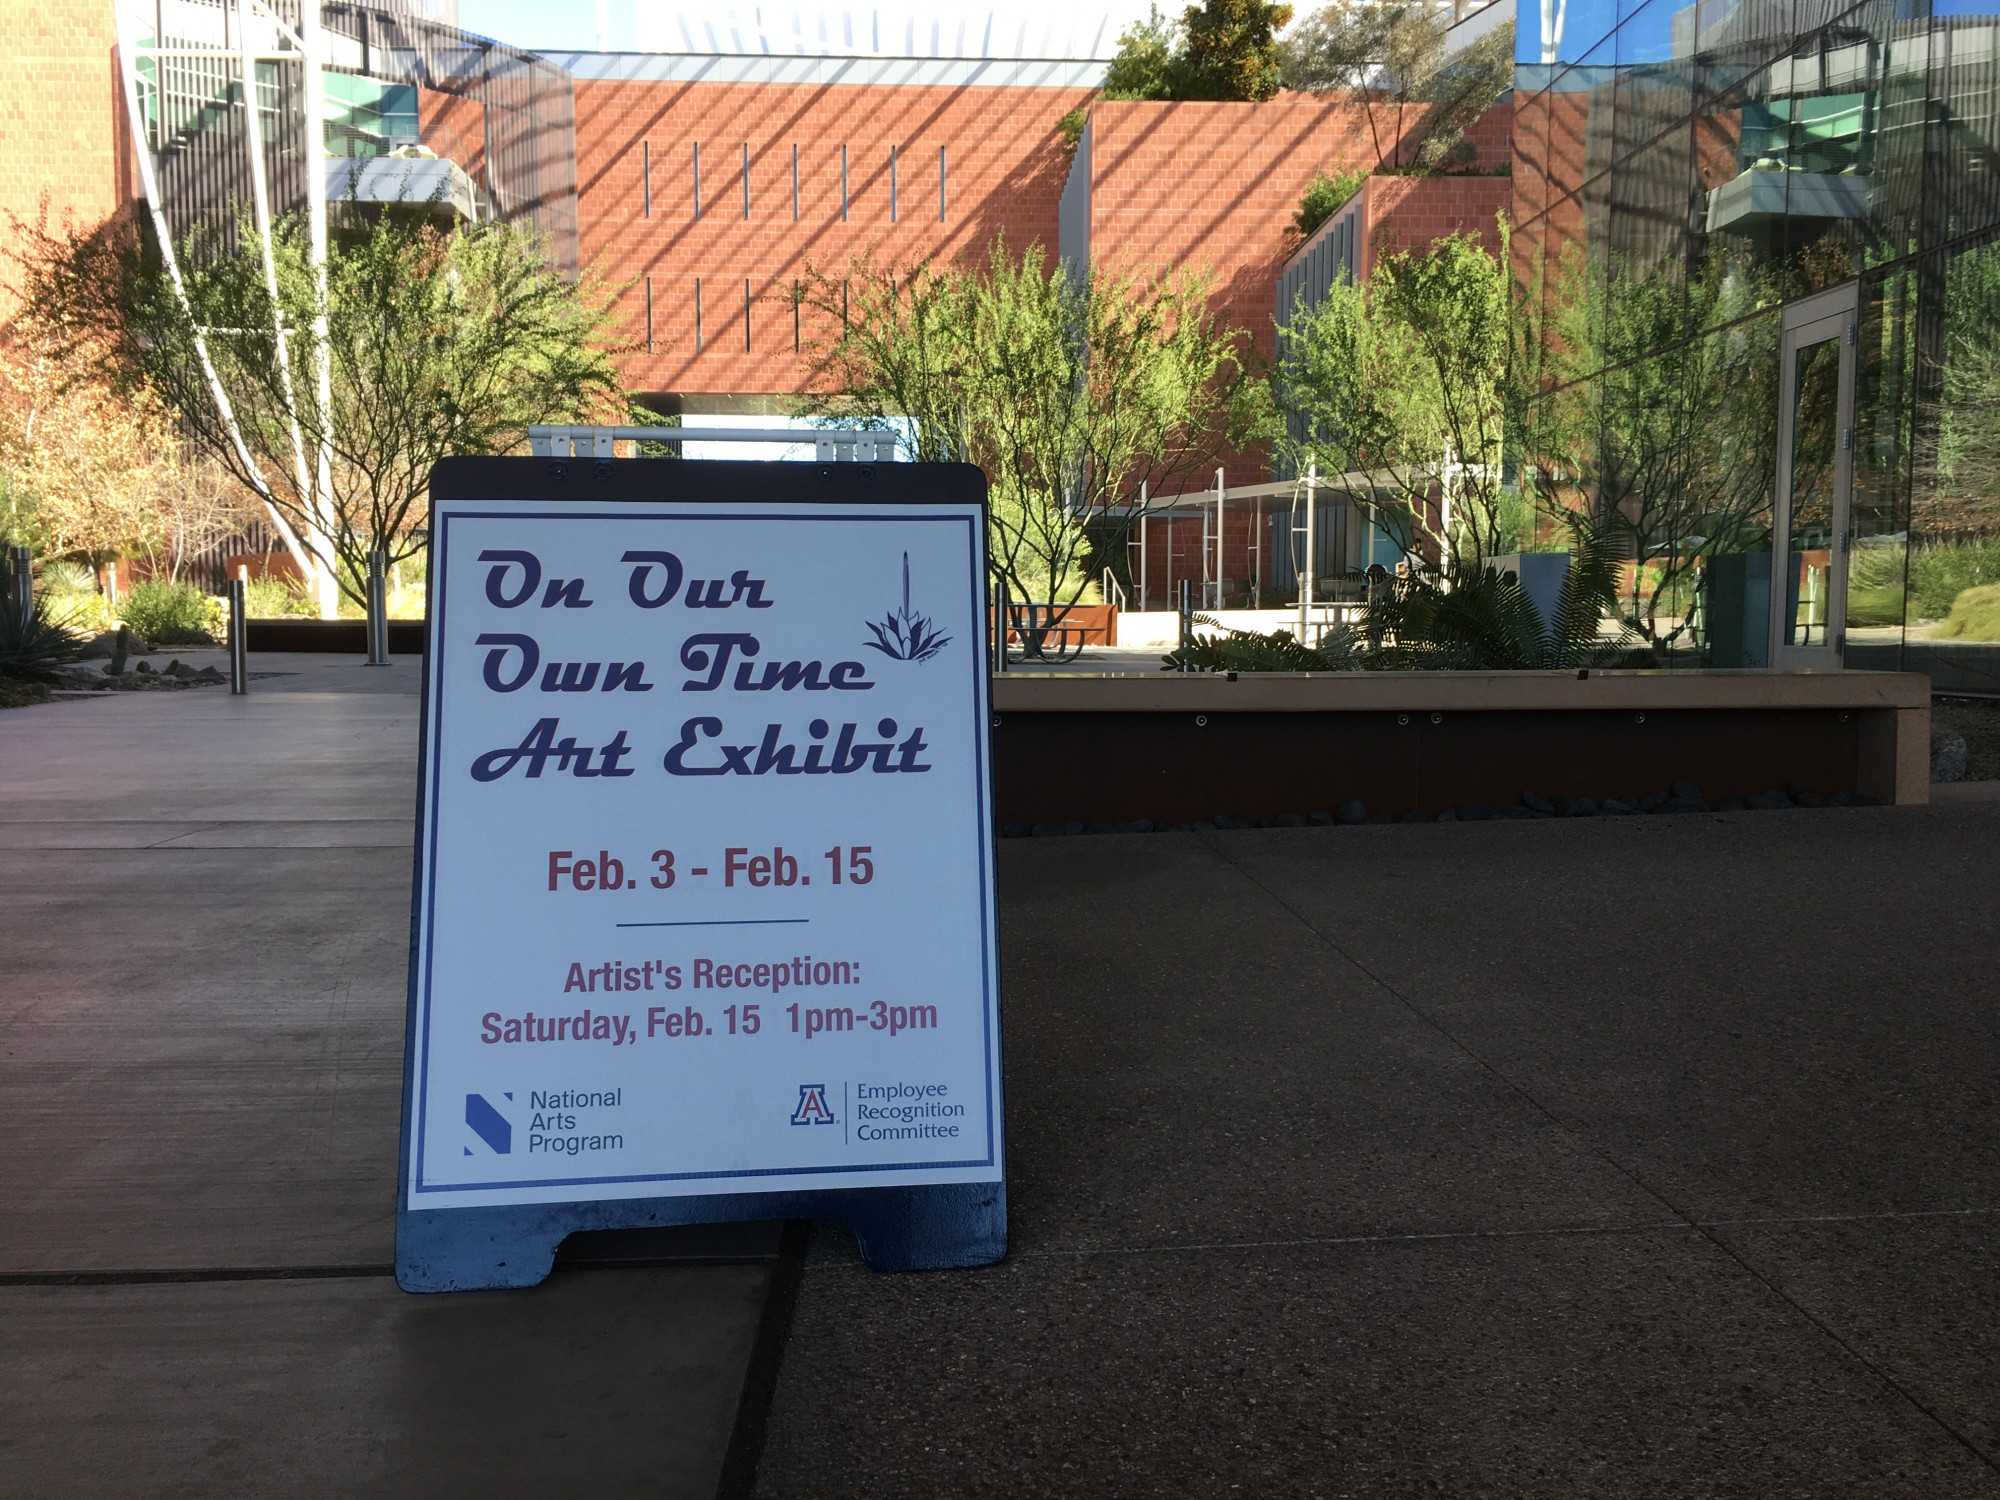 The "On Our Own Time" art exhibit sign, pointing visitors into the direction of the Bio-sciences Research Lab, where the event took place.